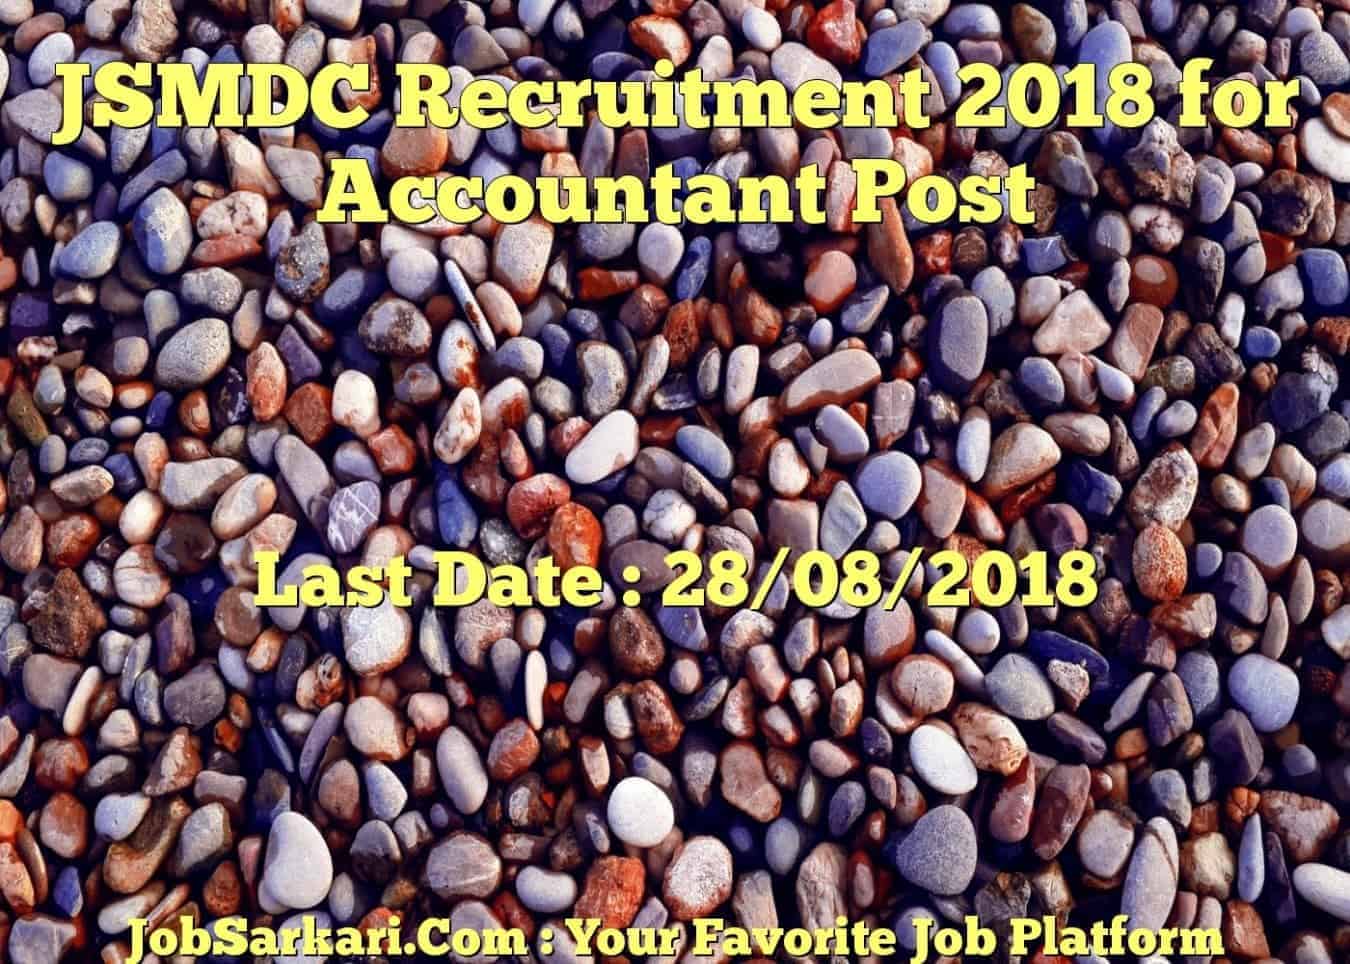 JSMDC Recruitment 2018 for Accountant Post